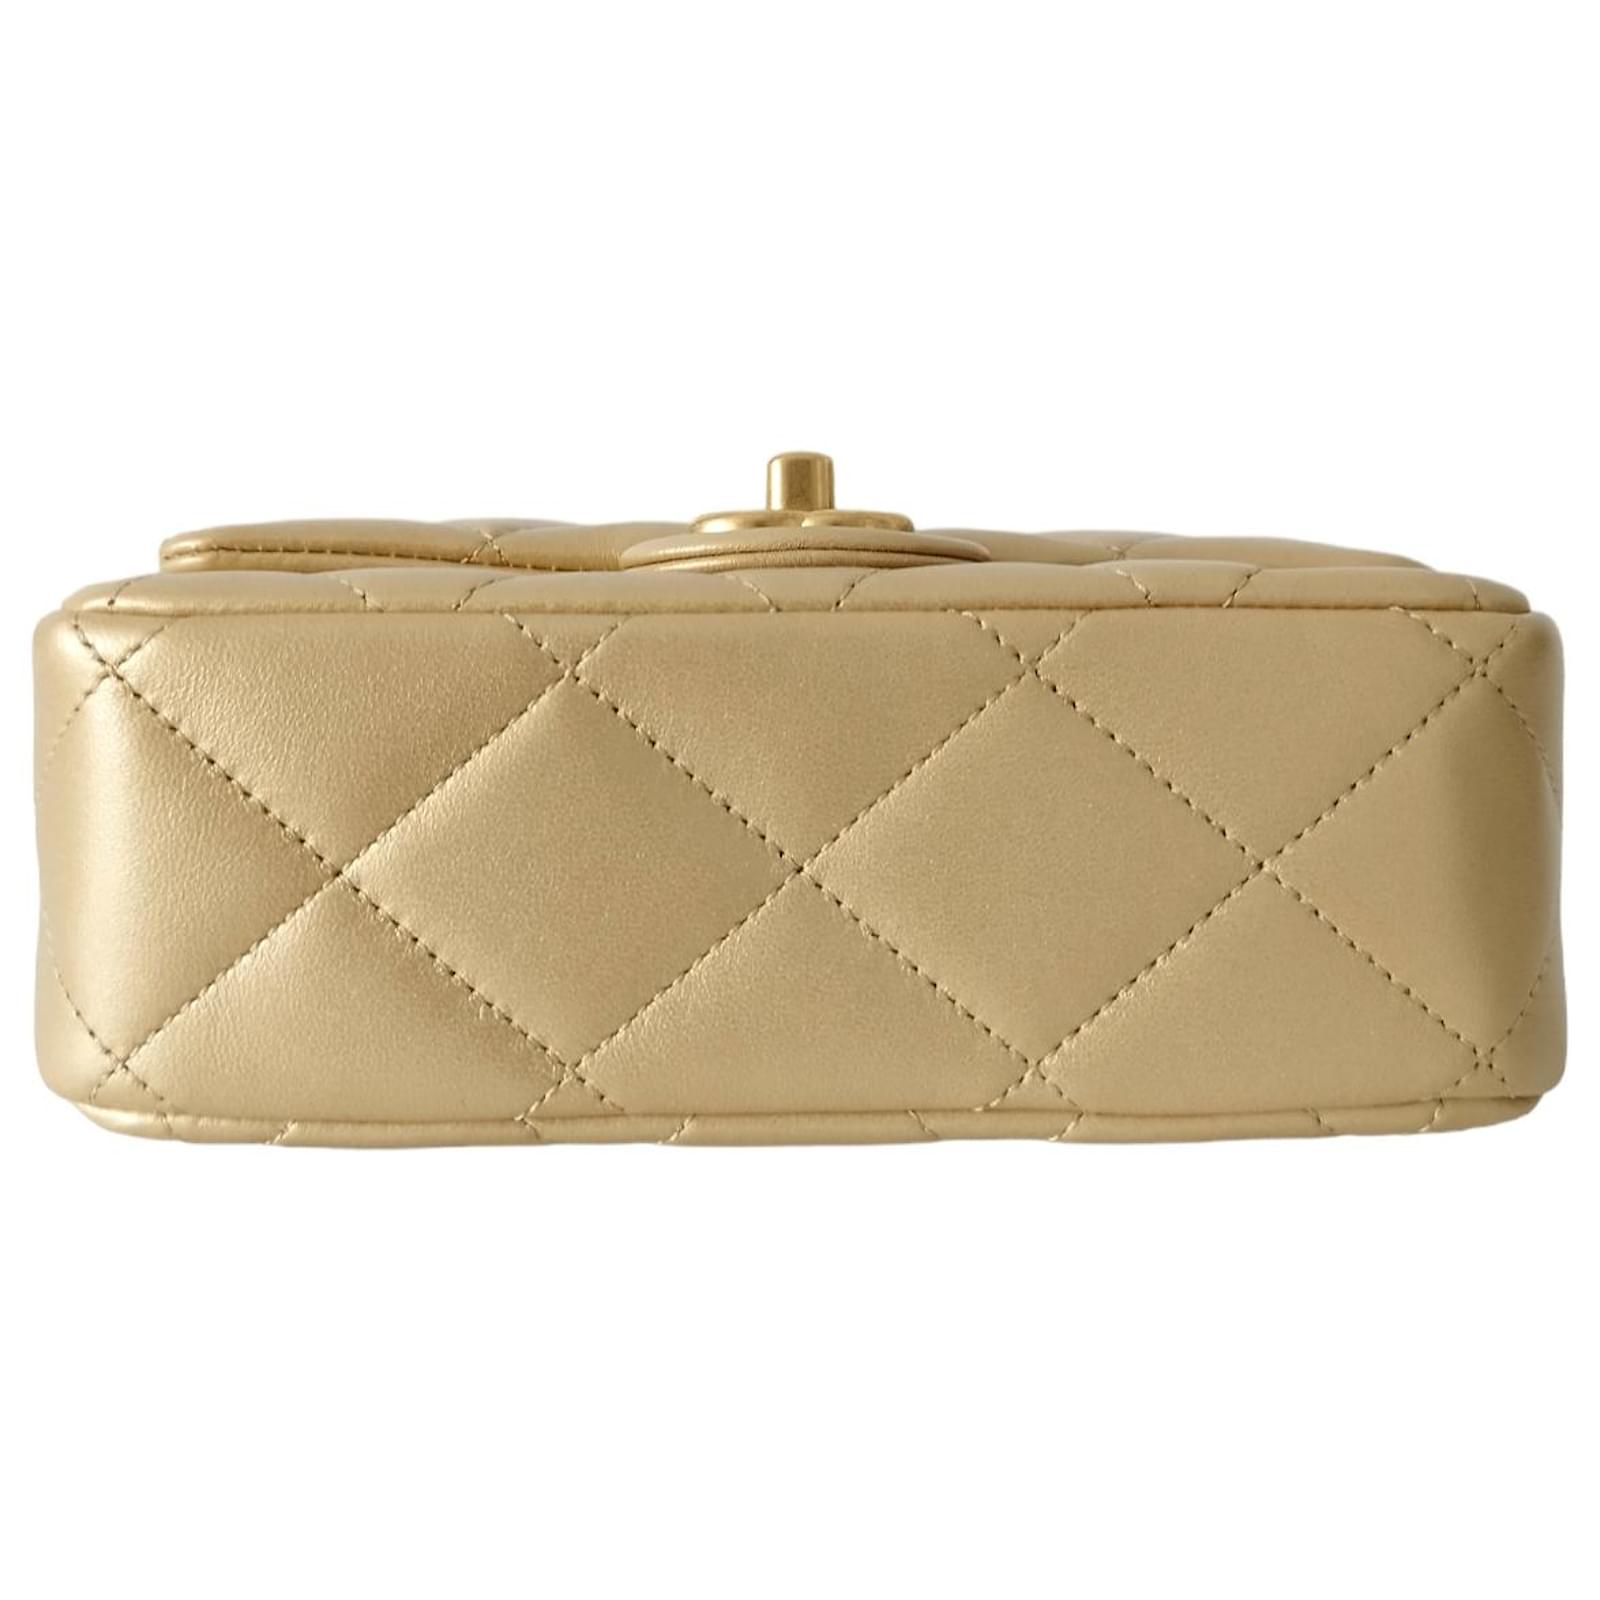 Timeless Chanel Classic Mini Flap bag gold leather 23P Sweet Heart